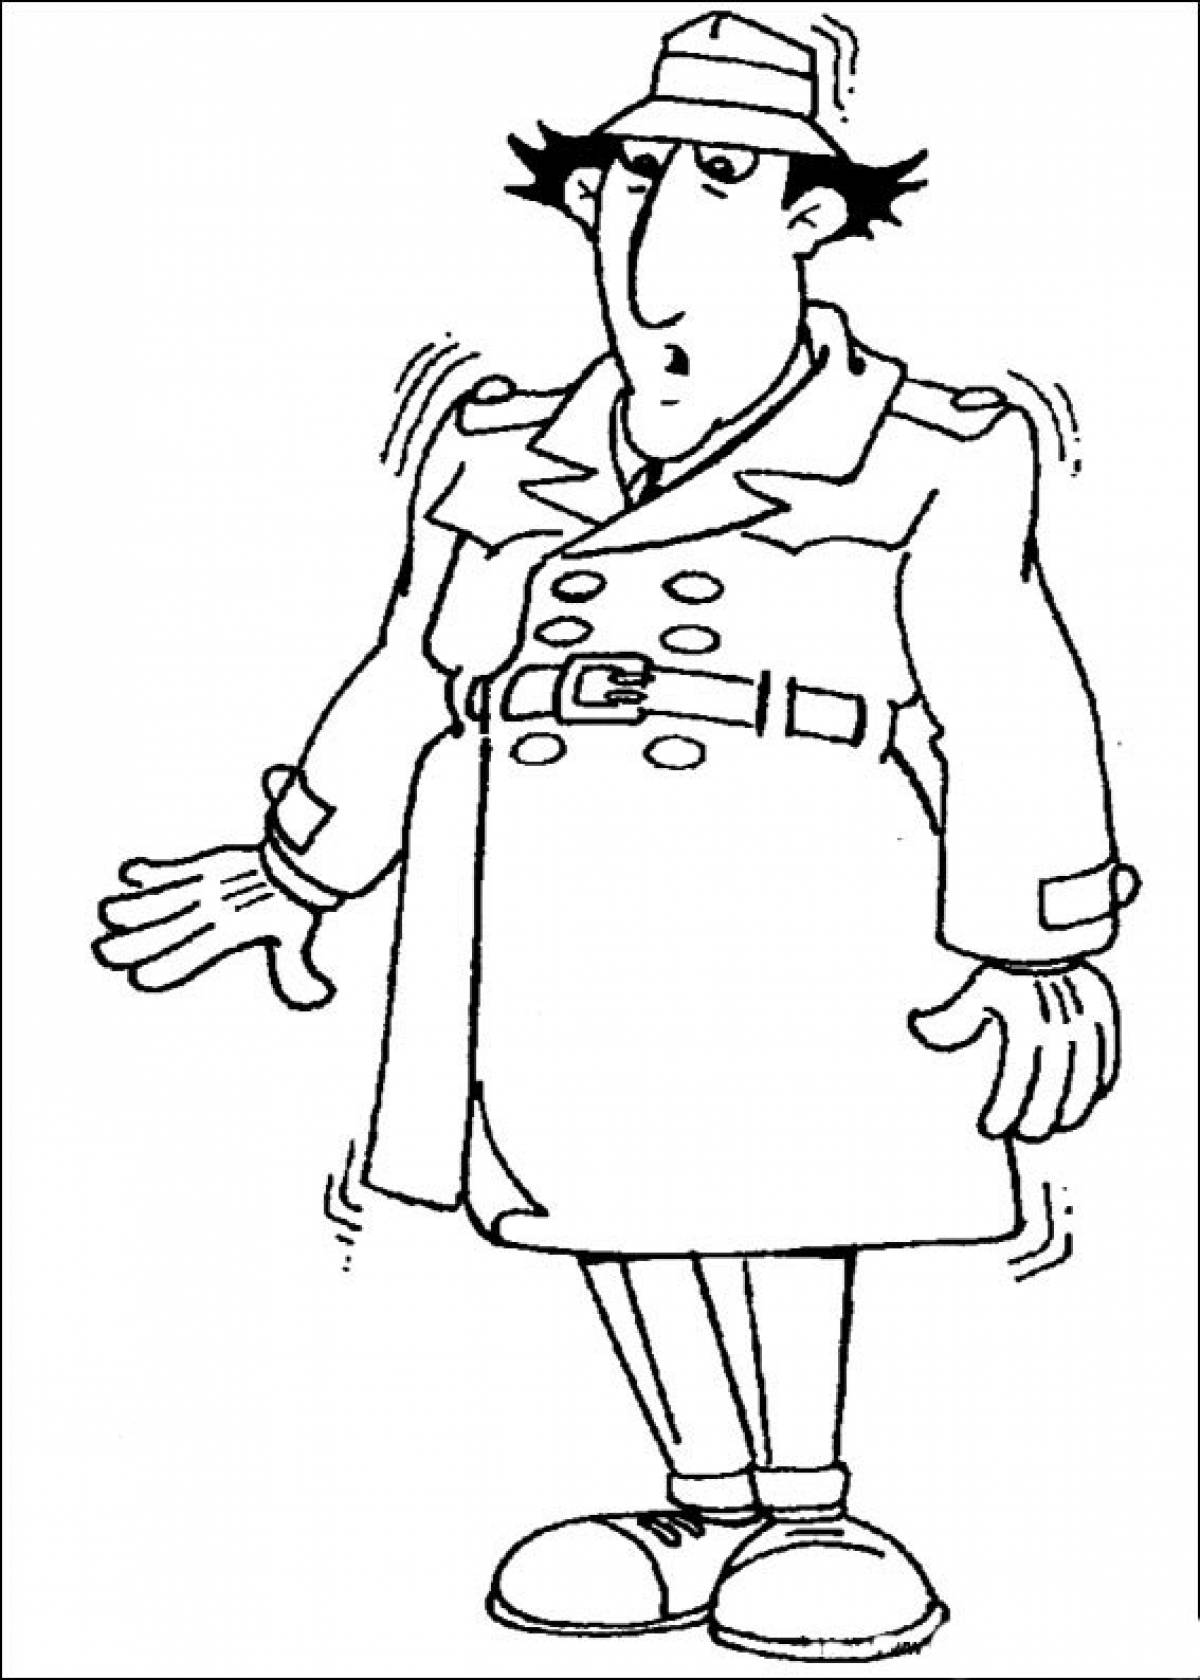 Inspector gadget coloring page